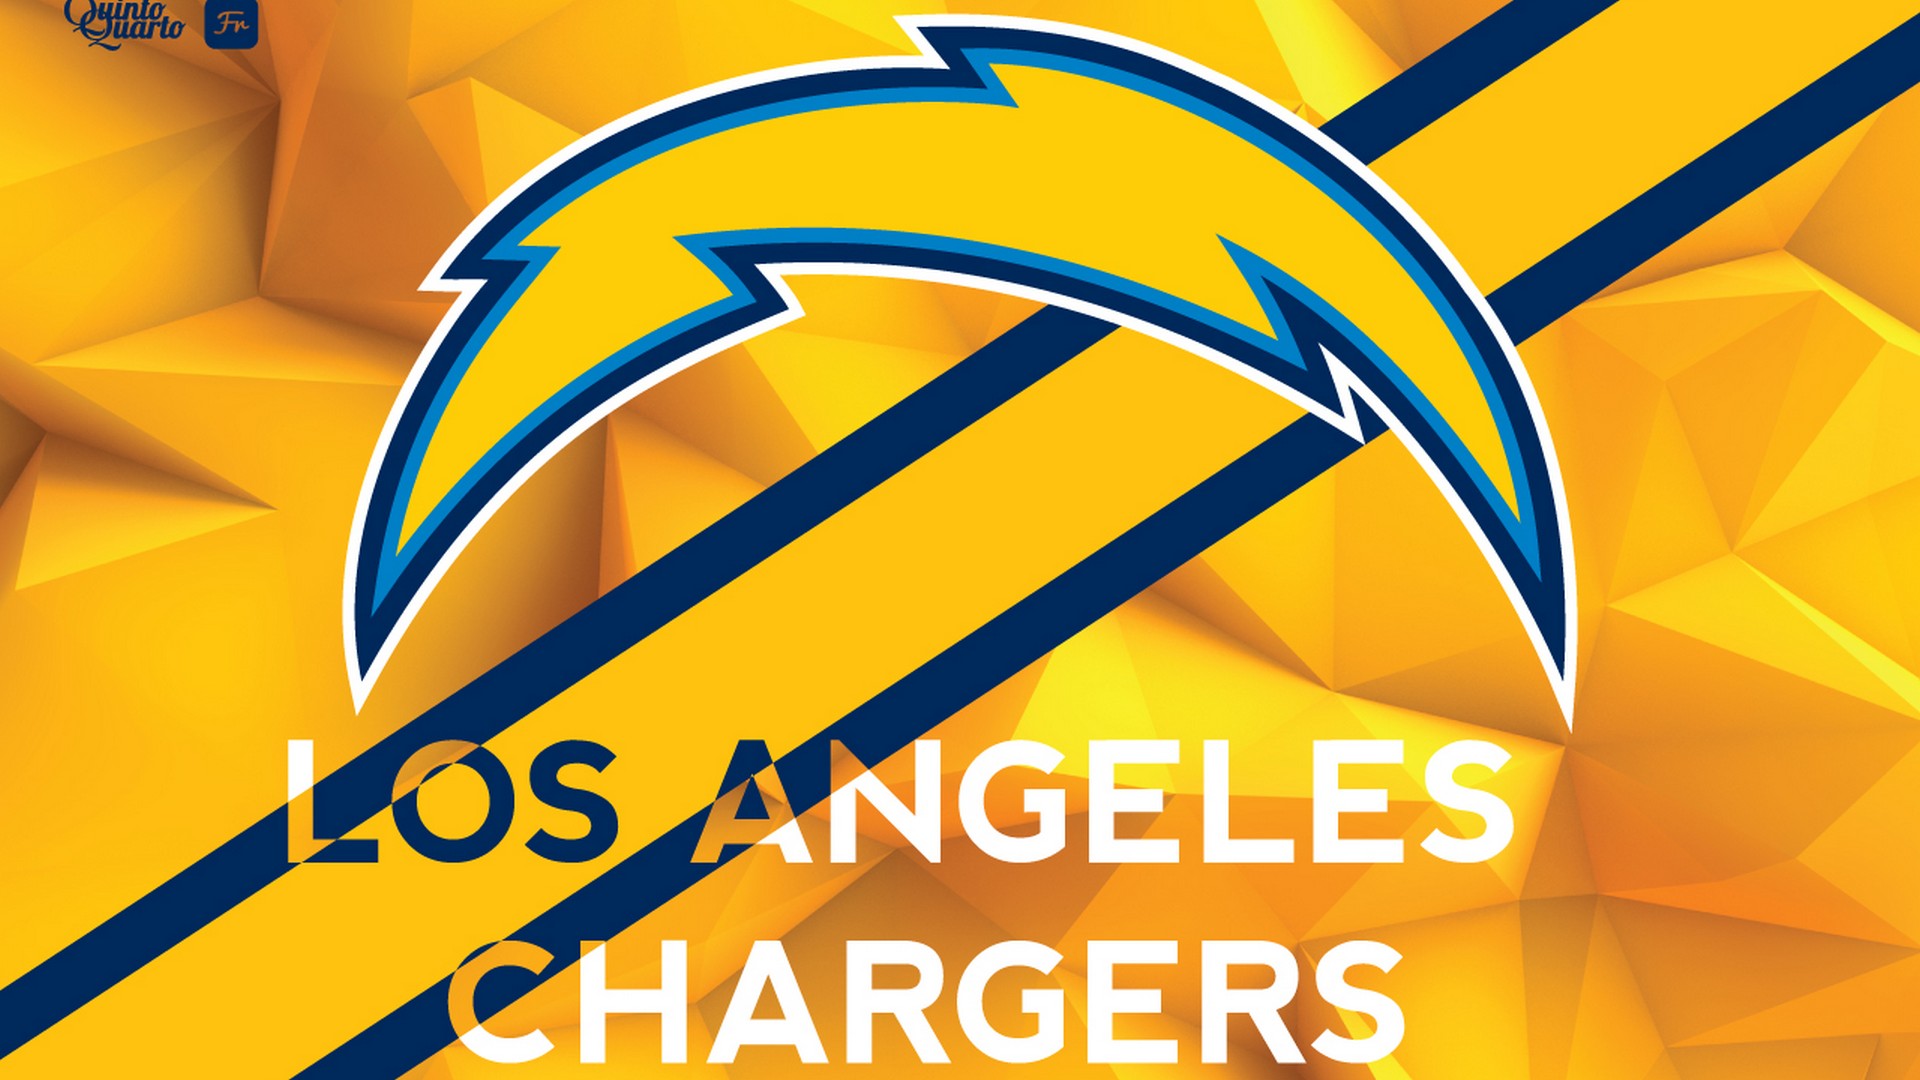 Los Angeles Chargers Wallpaper For Mac Nfl Football